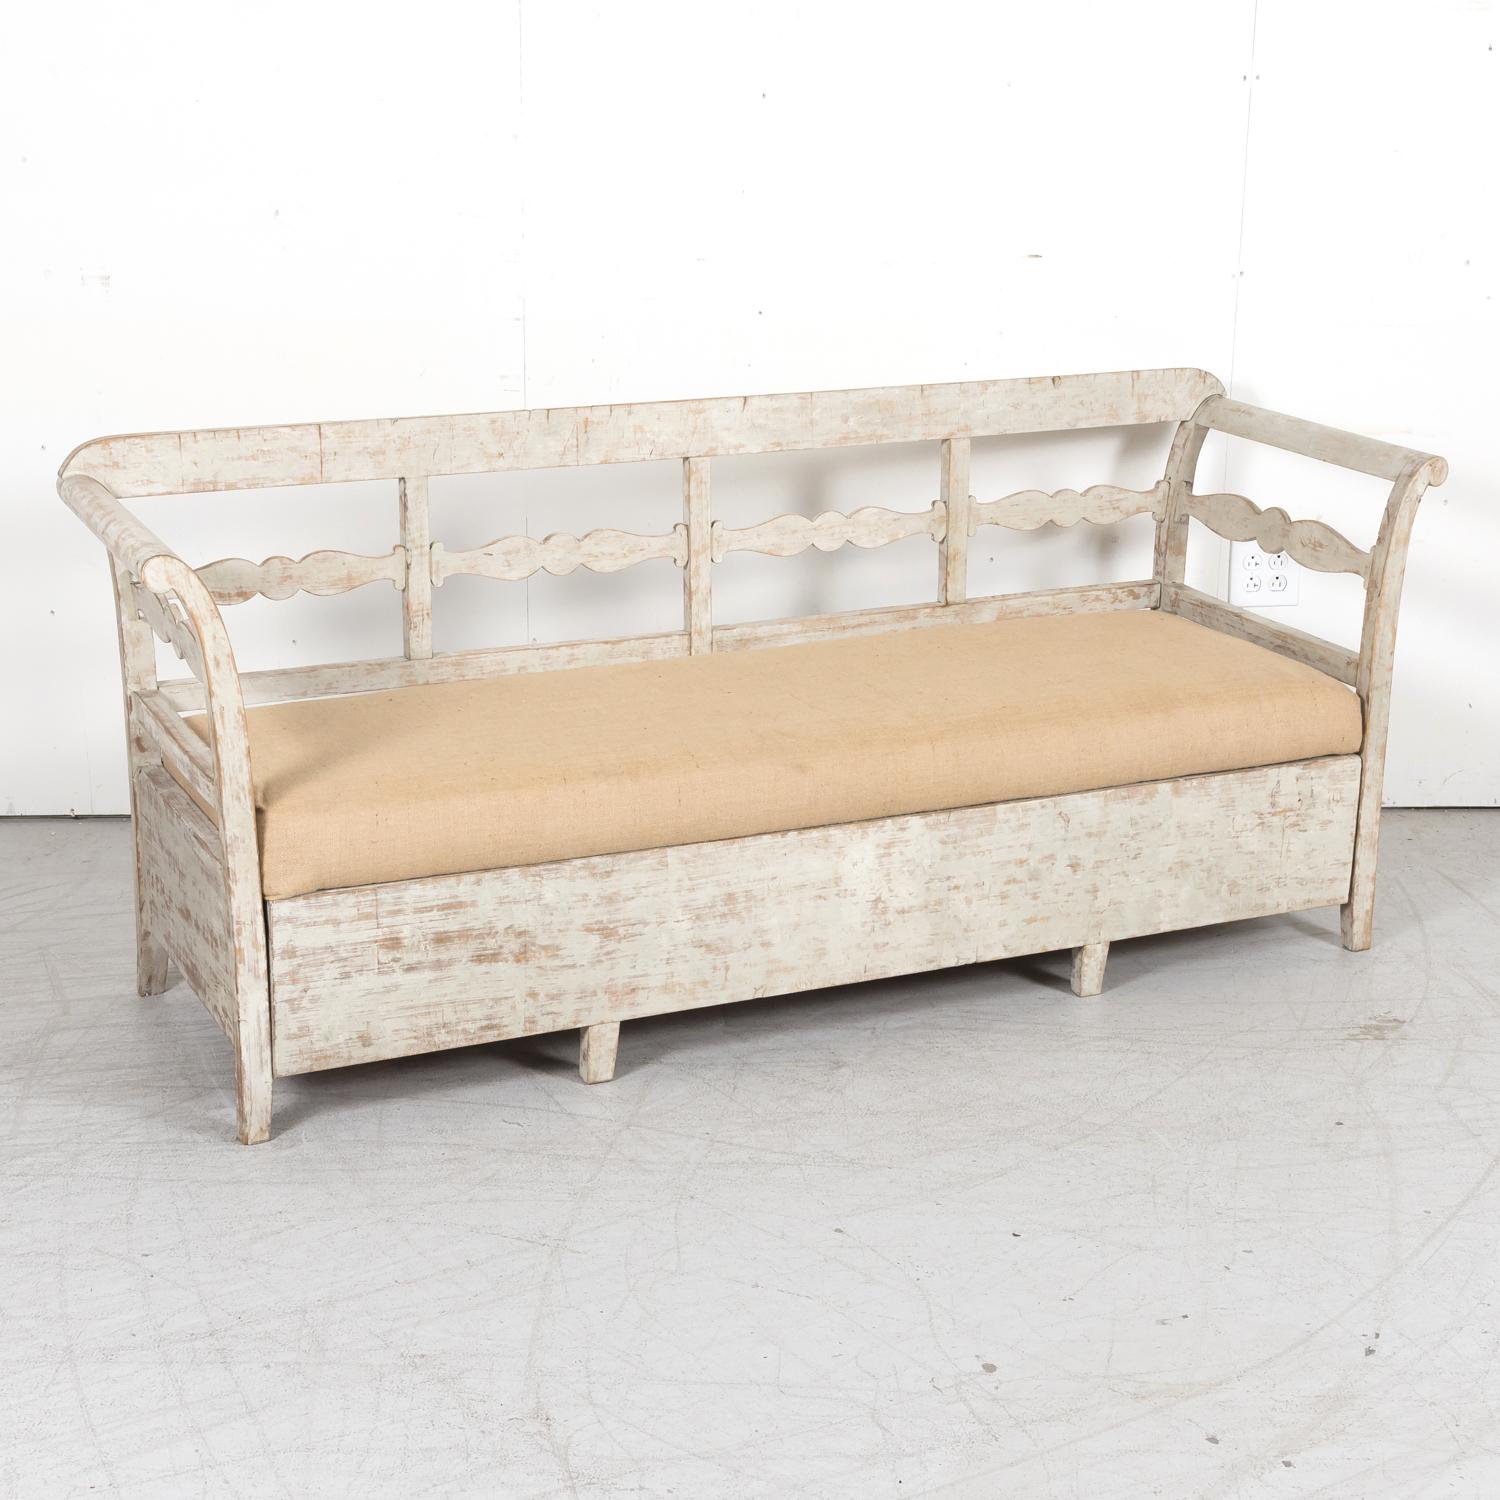 19th Century Painted Swedish Bench with Trundle Bed 2